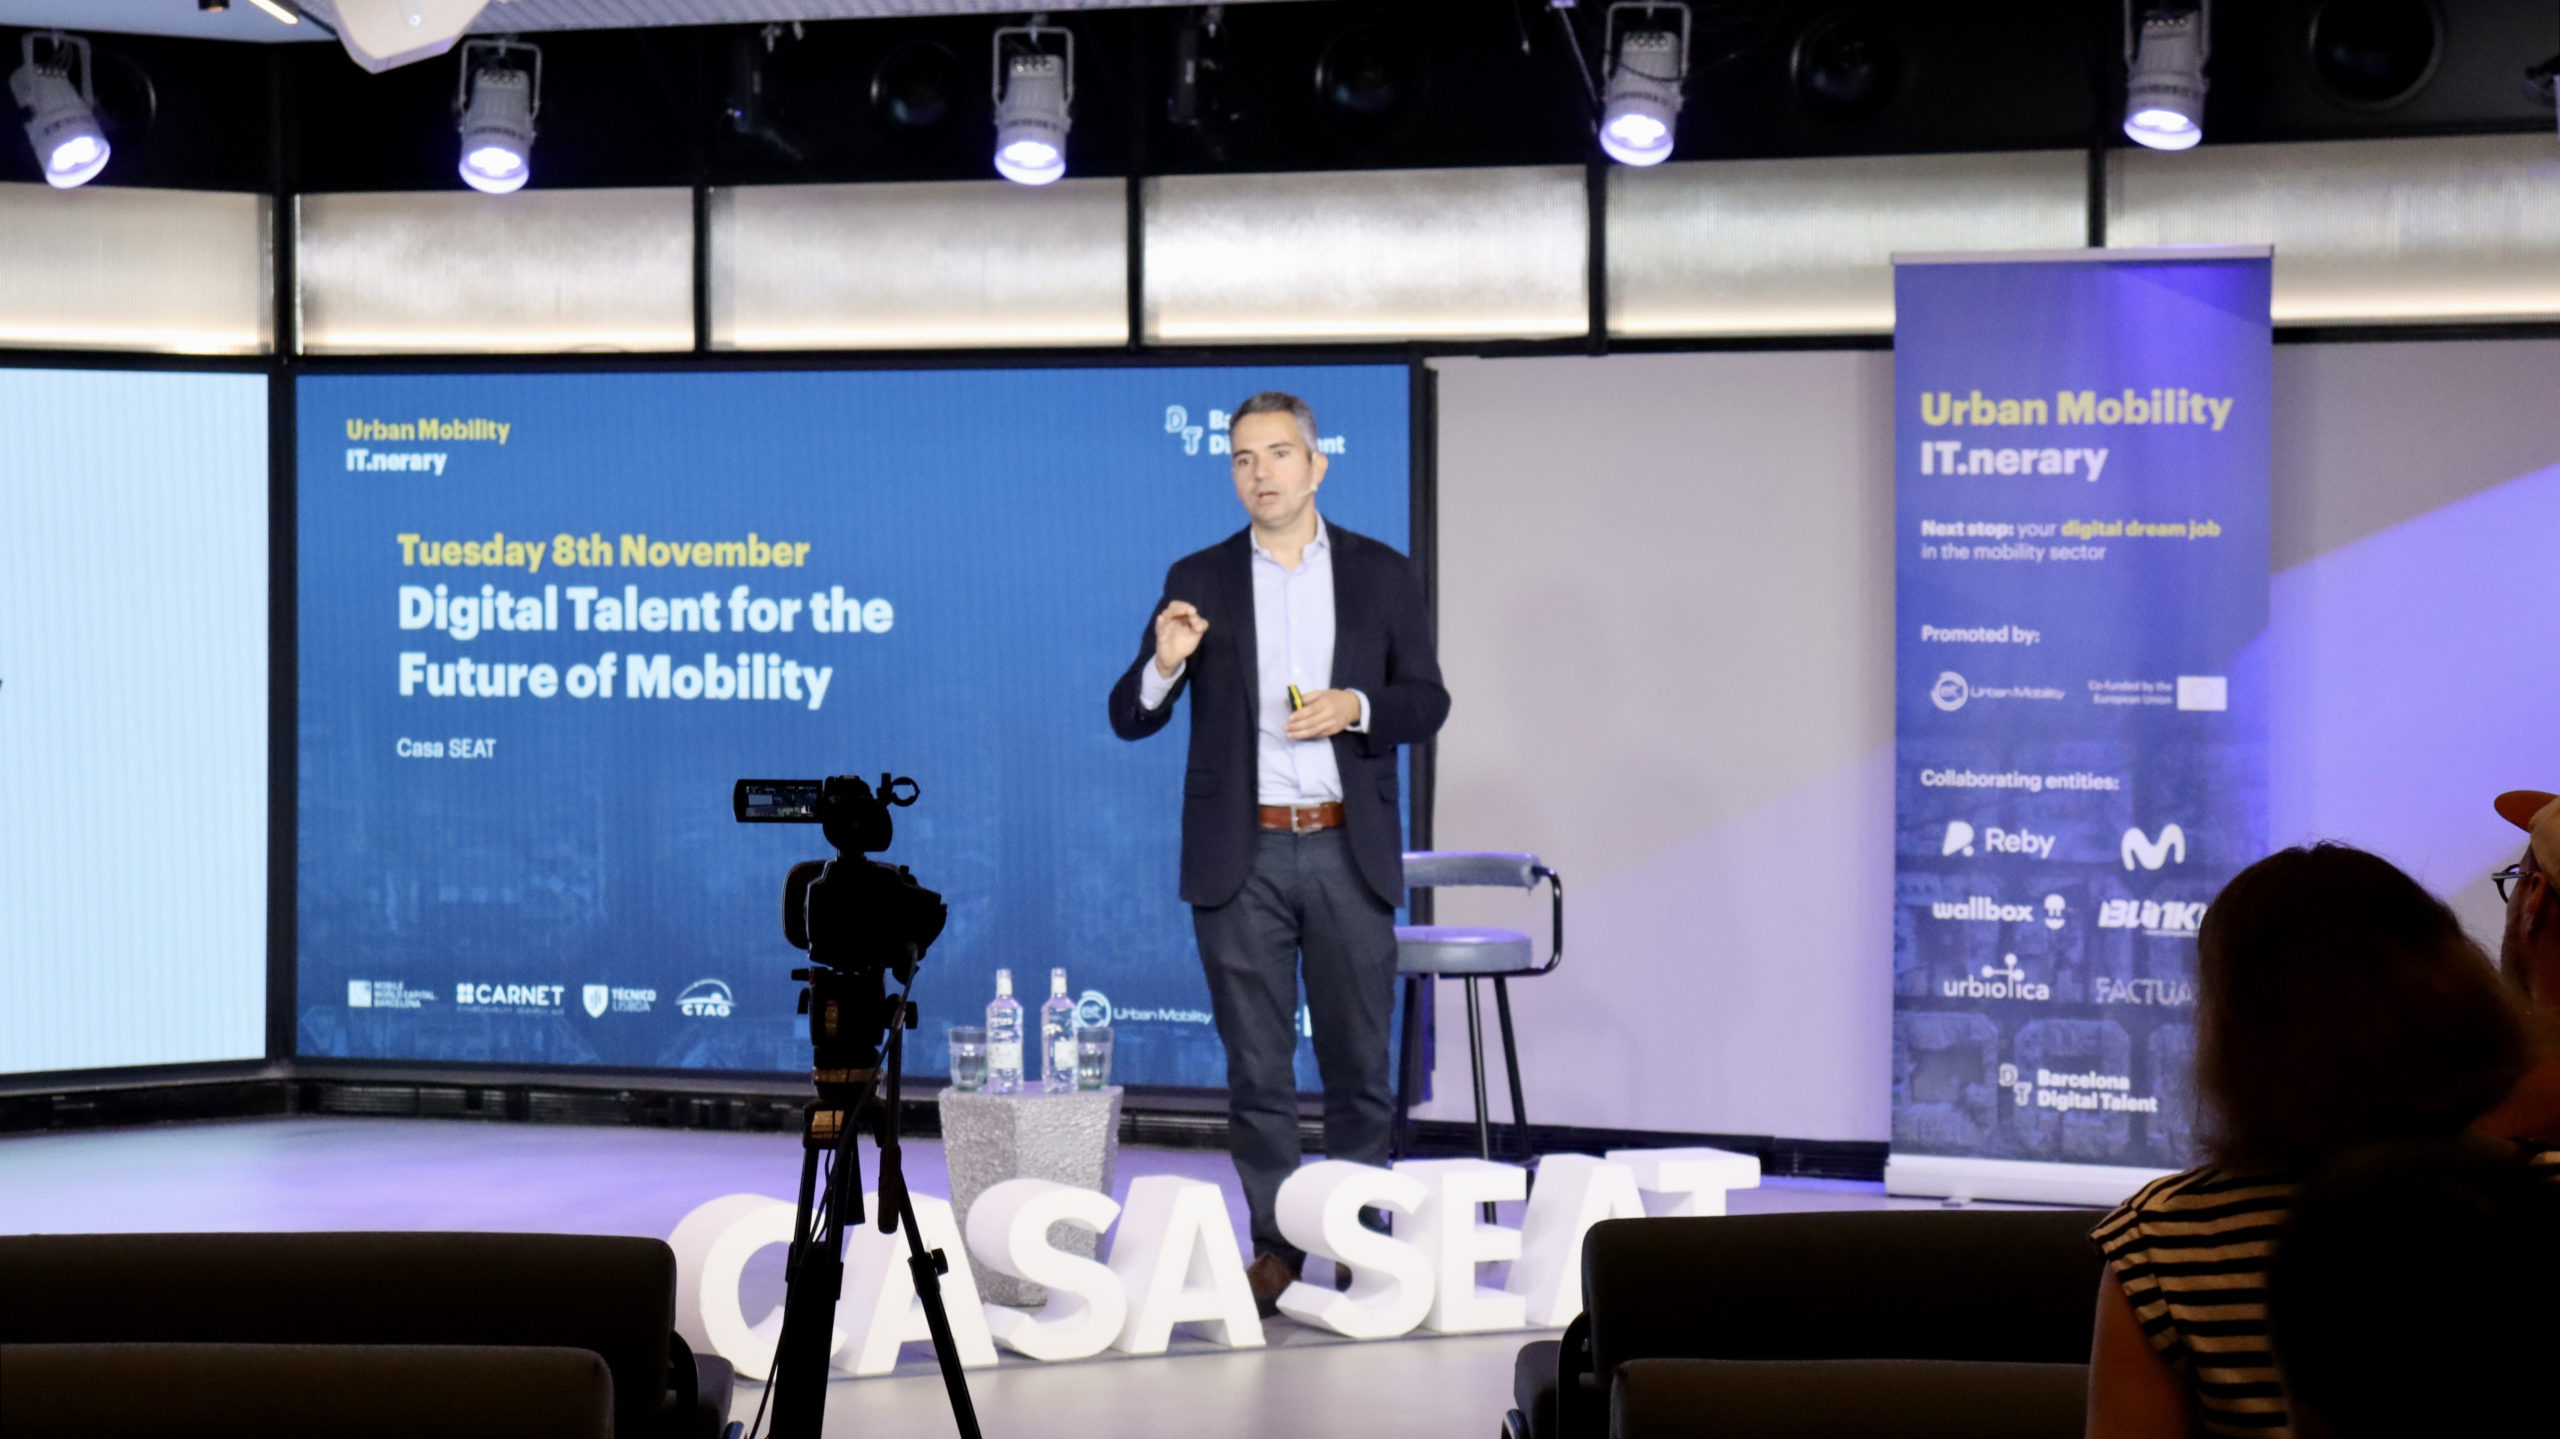 Mobile World Capital Barcelona brings together national and international digital talent in training sessions on urban mobility